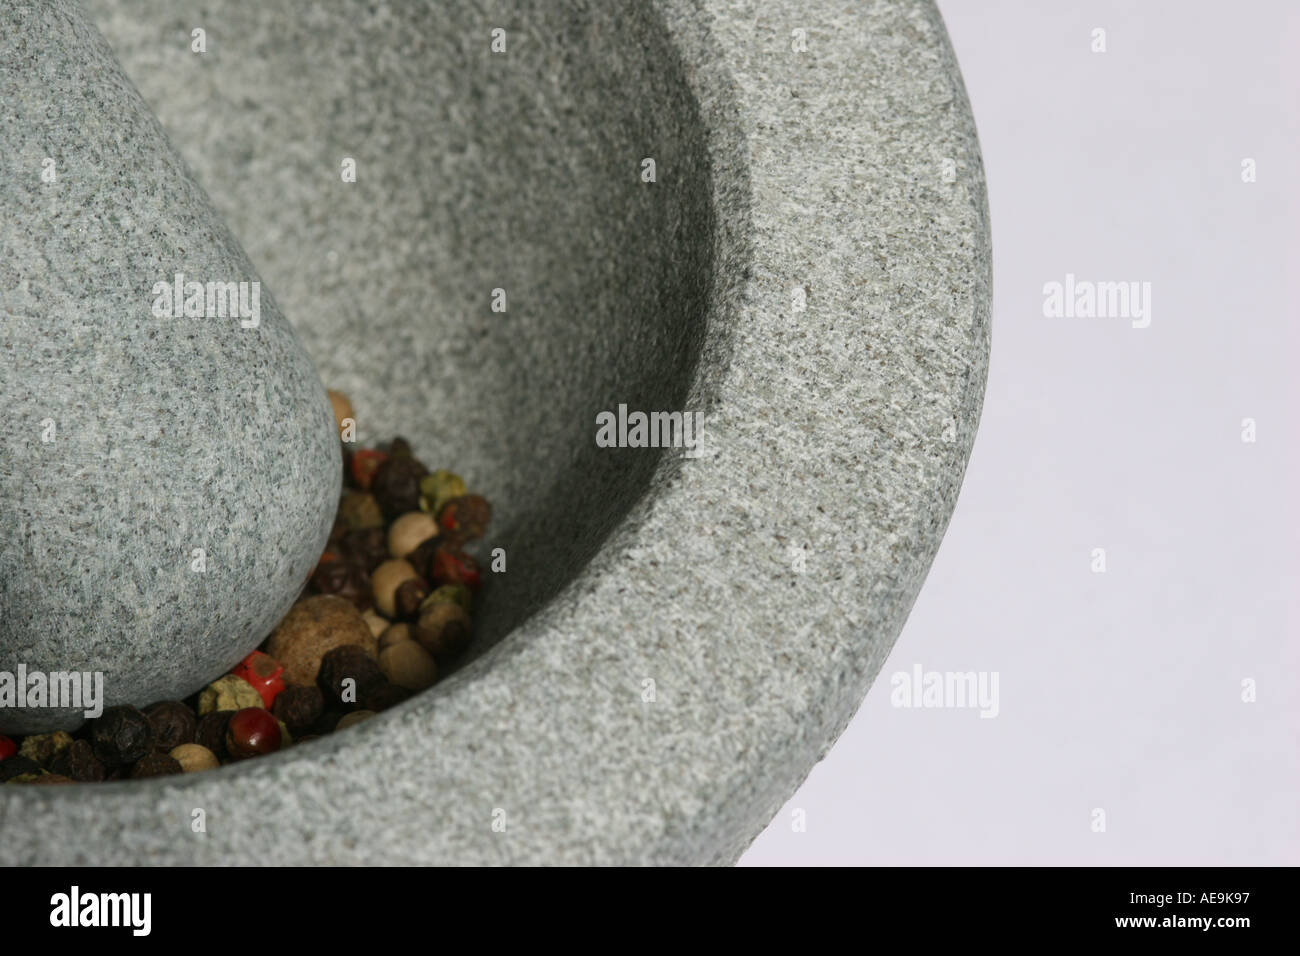 0216 Mixed Pepper Corn in a Pestle and mortar 7 Stock Photo